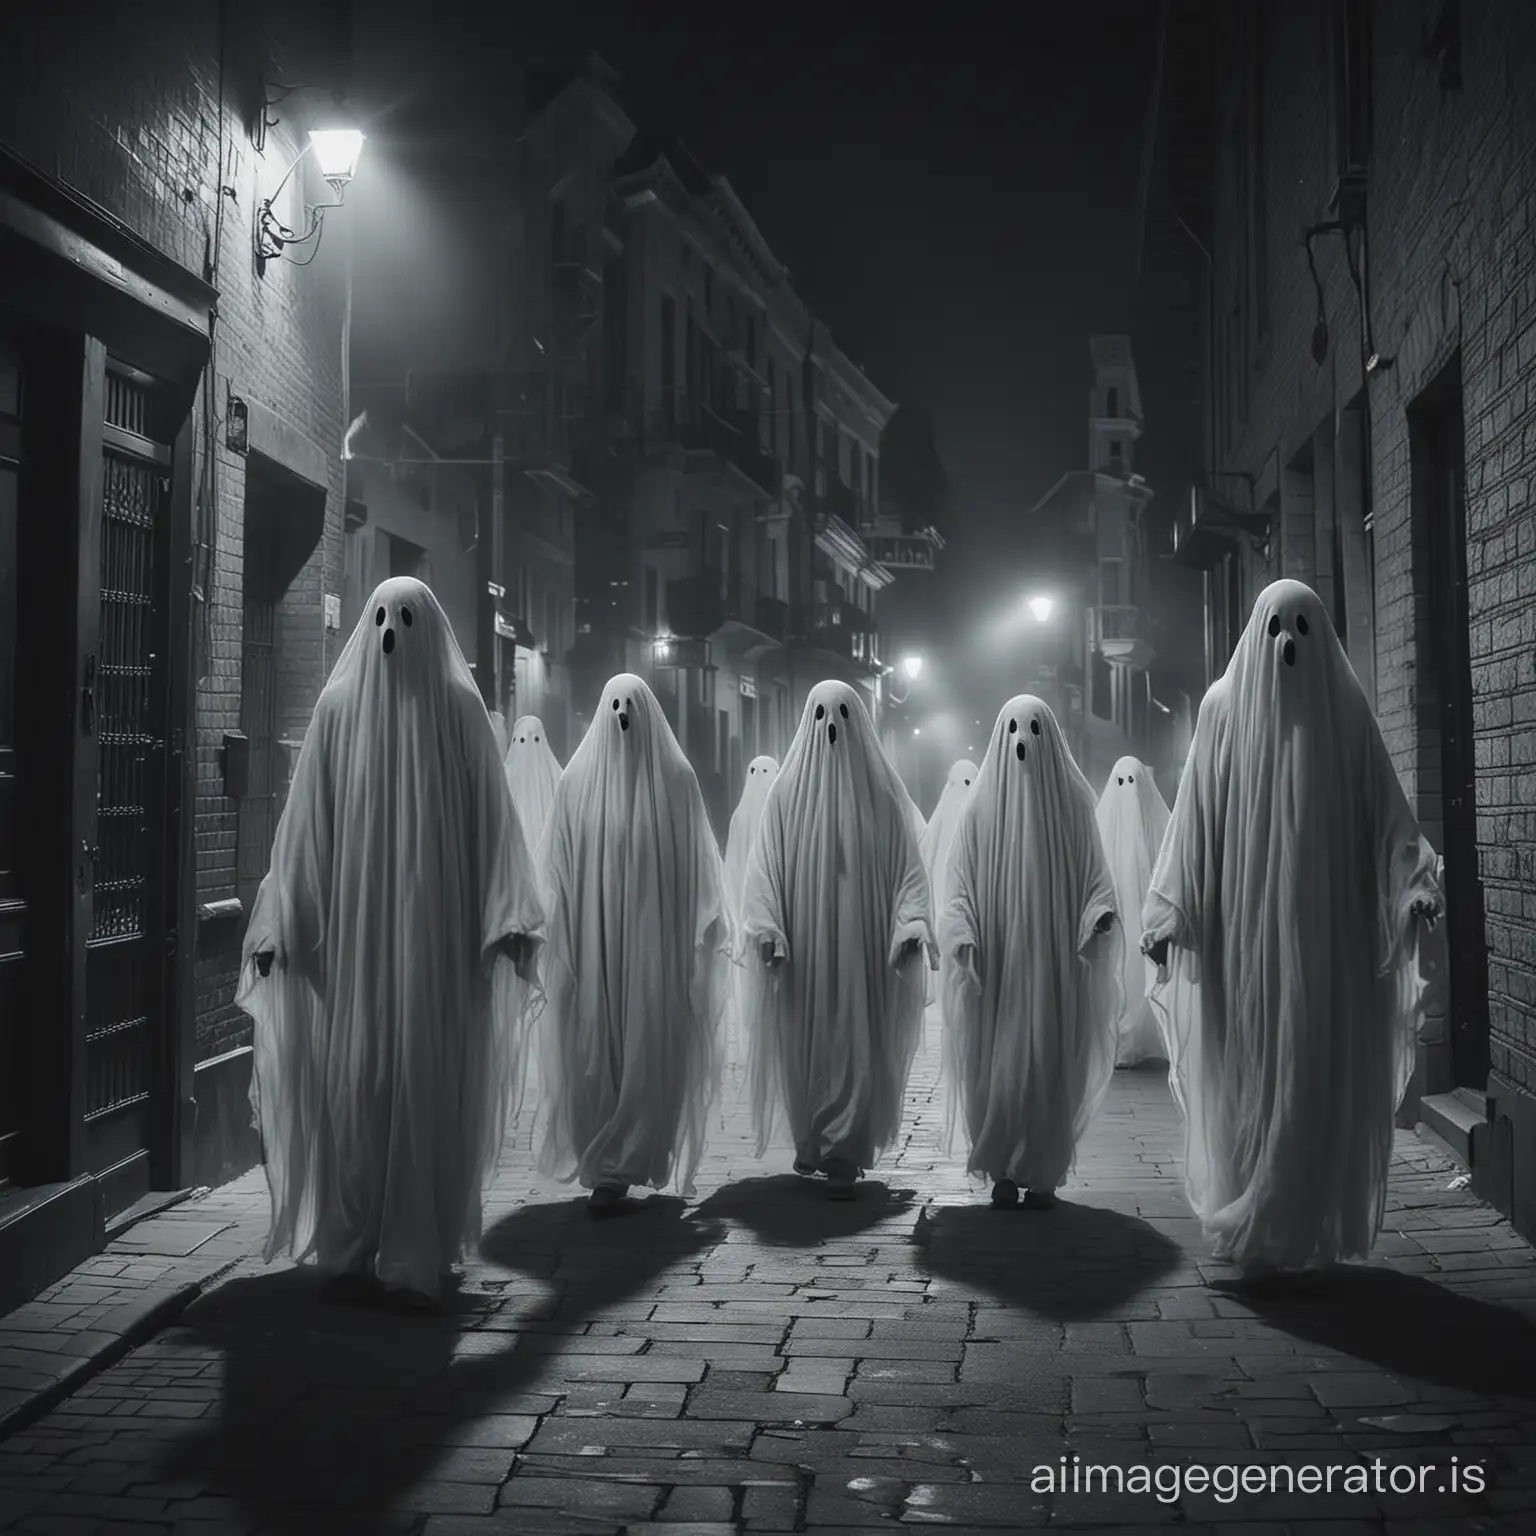 Ghosts wandering on the streets at night